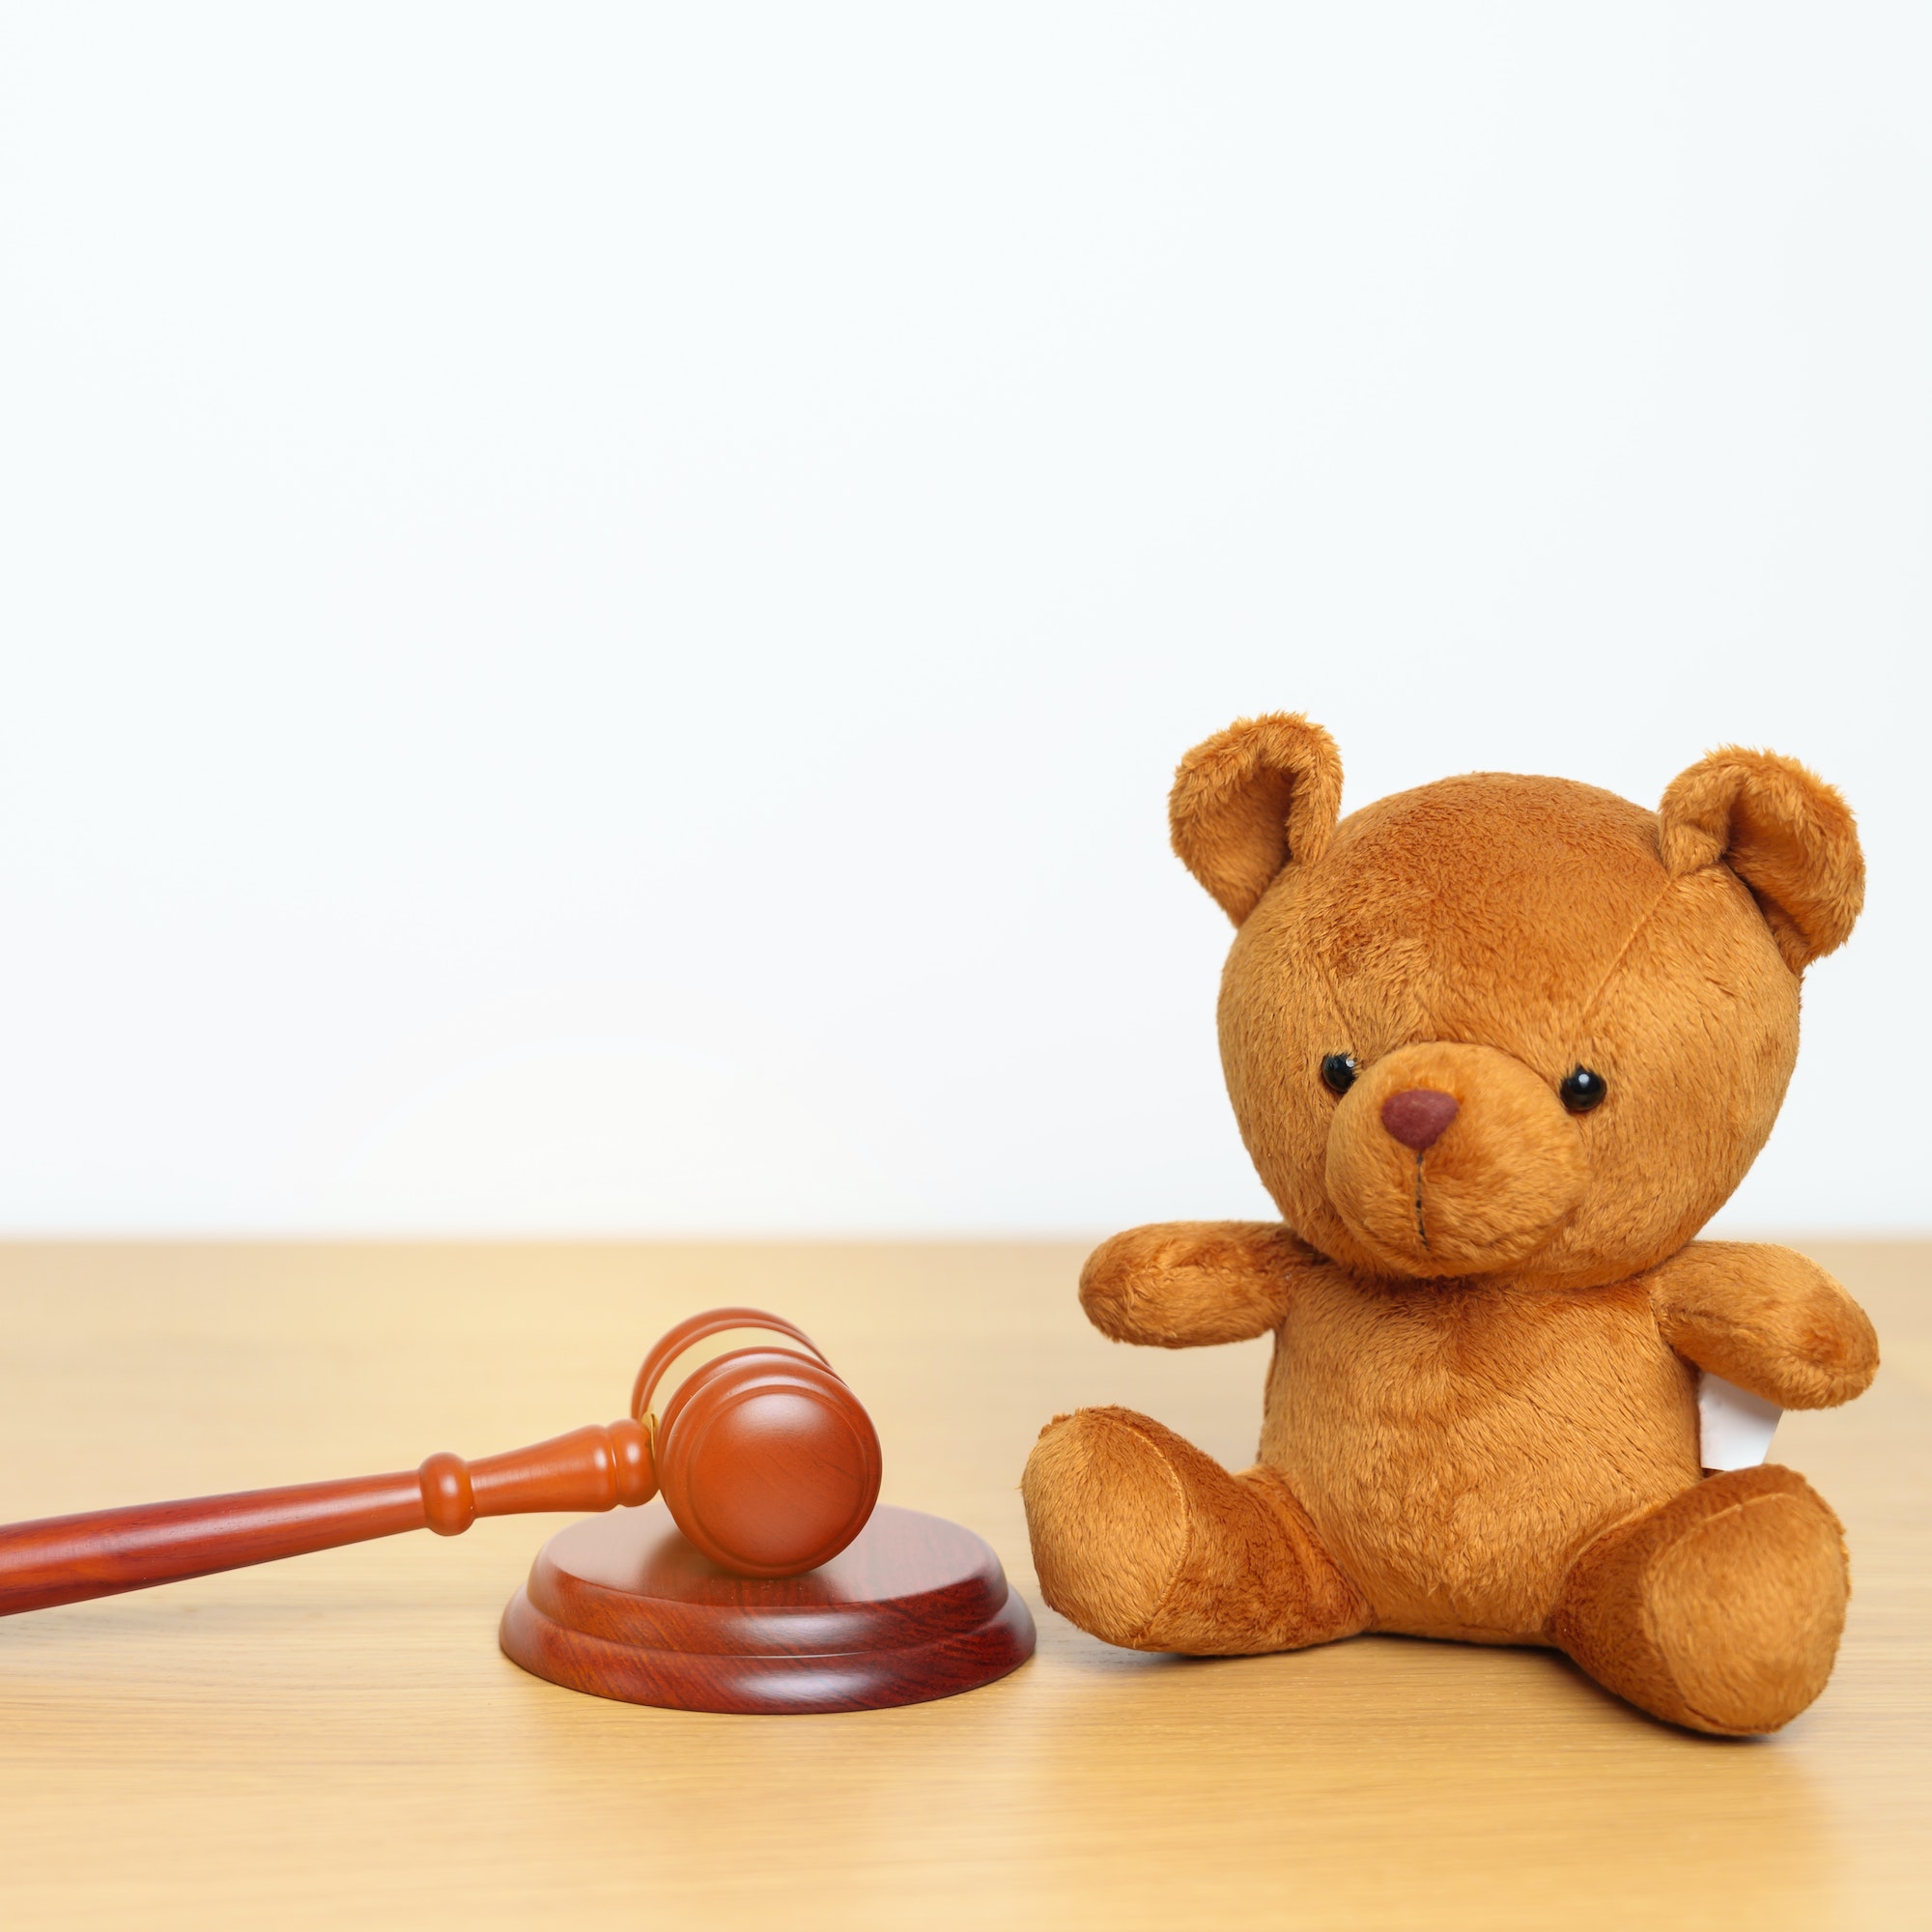 Children, Kid and Family Law concepts. toy bear with gavel justice hammer on desk in courthouse.